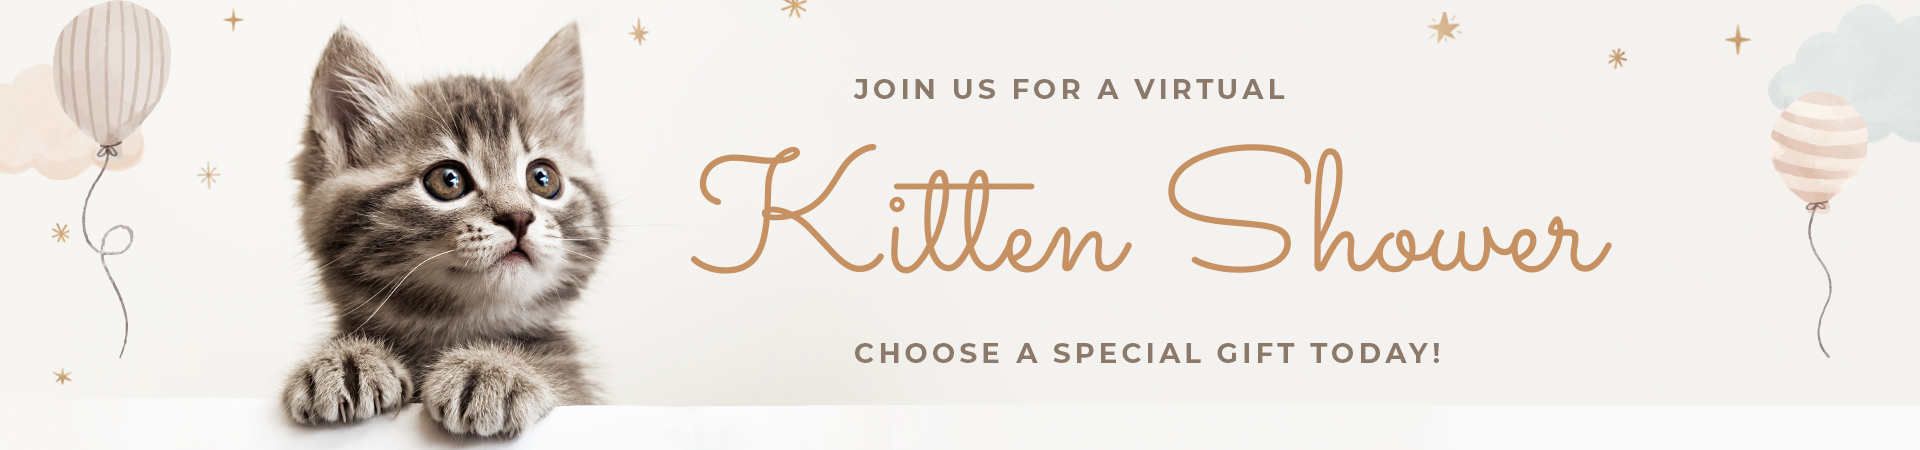 Join us for a virtual Kitten Shower! Choose a special gift today!